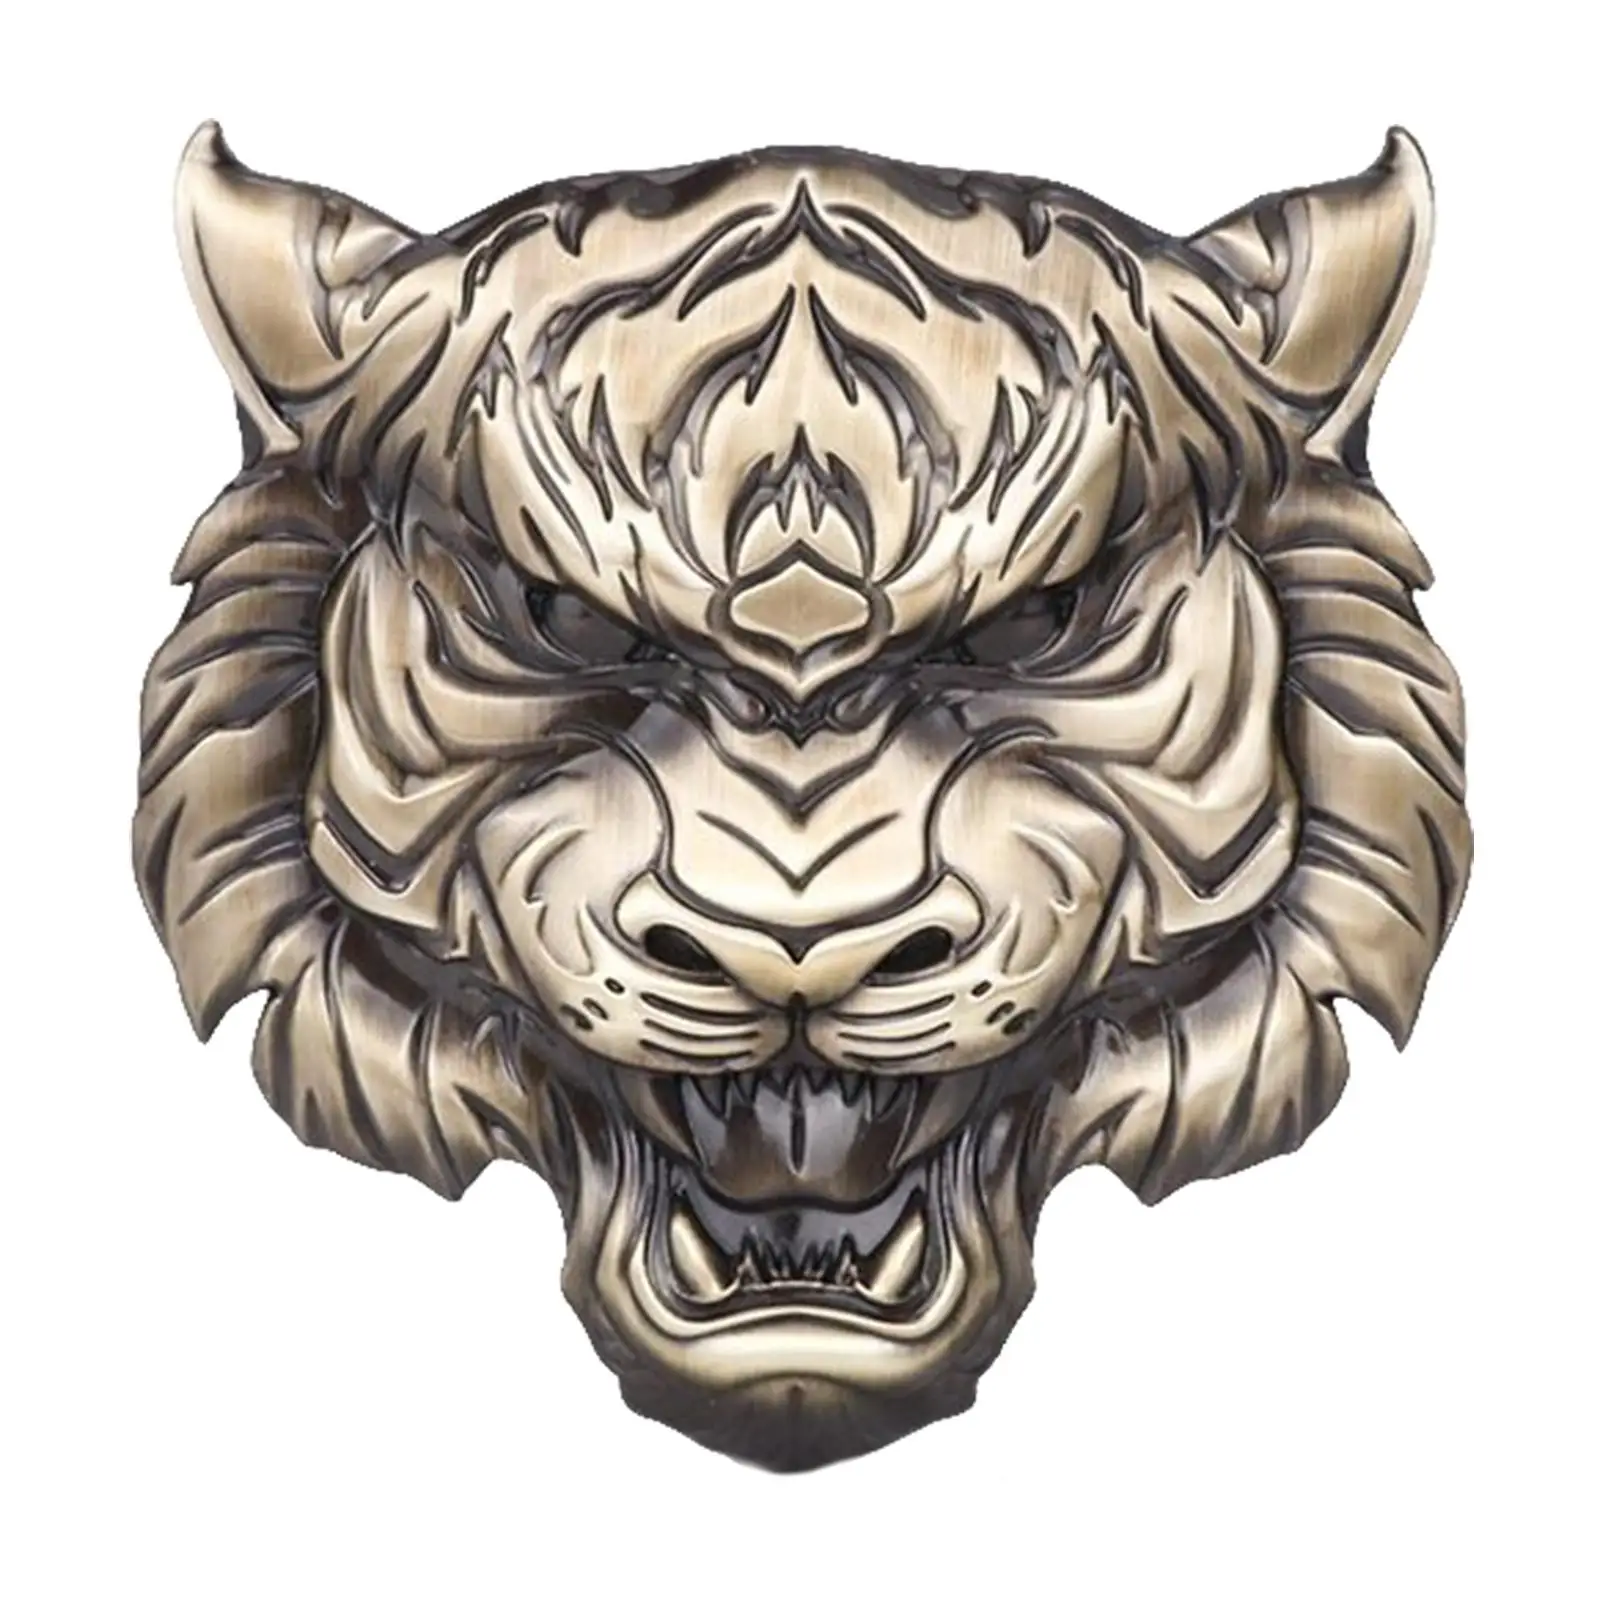 Tiger Face Auto Sticker Decal 3D Styling Metal Body Decor Label for Window Side Vehicles Truck Motorcycle